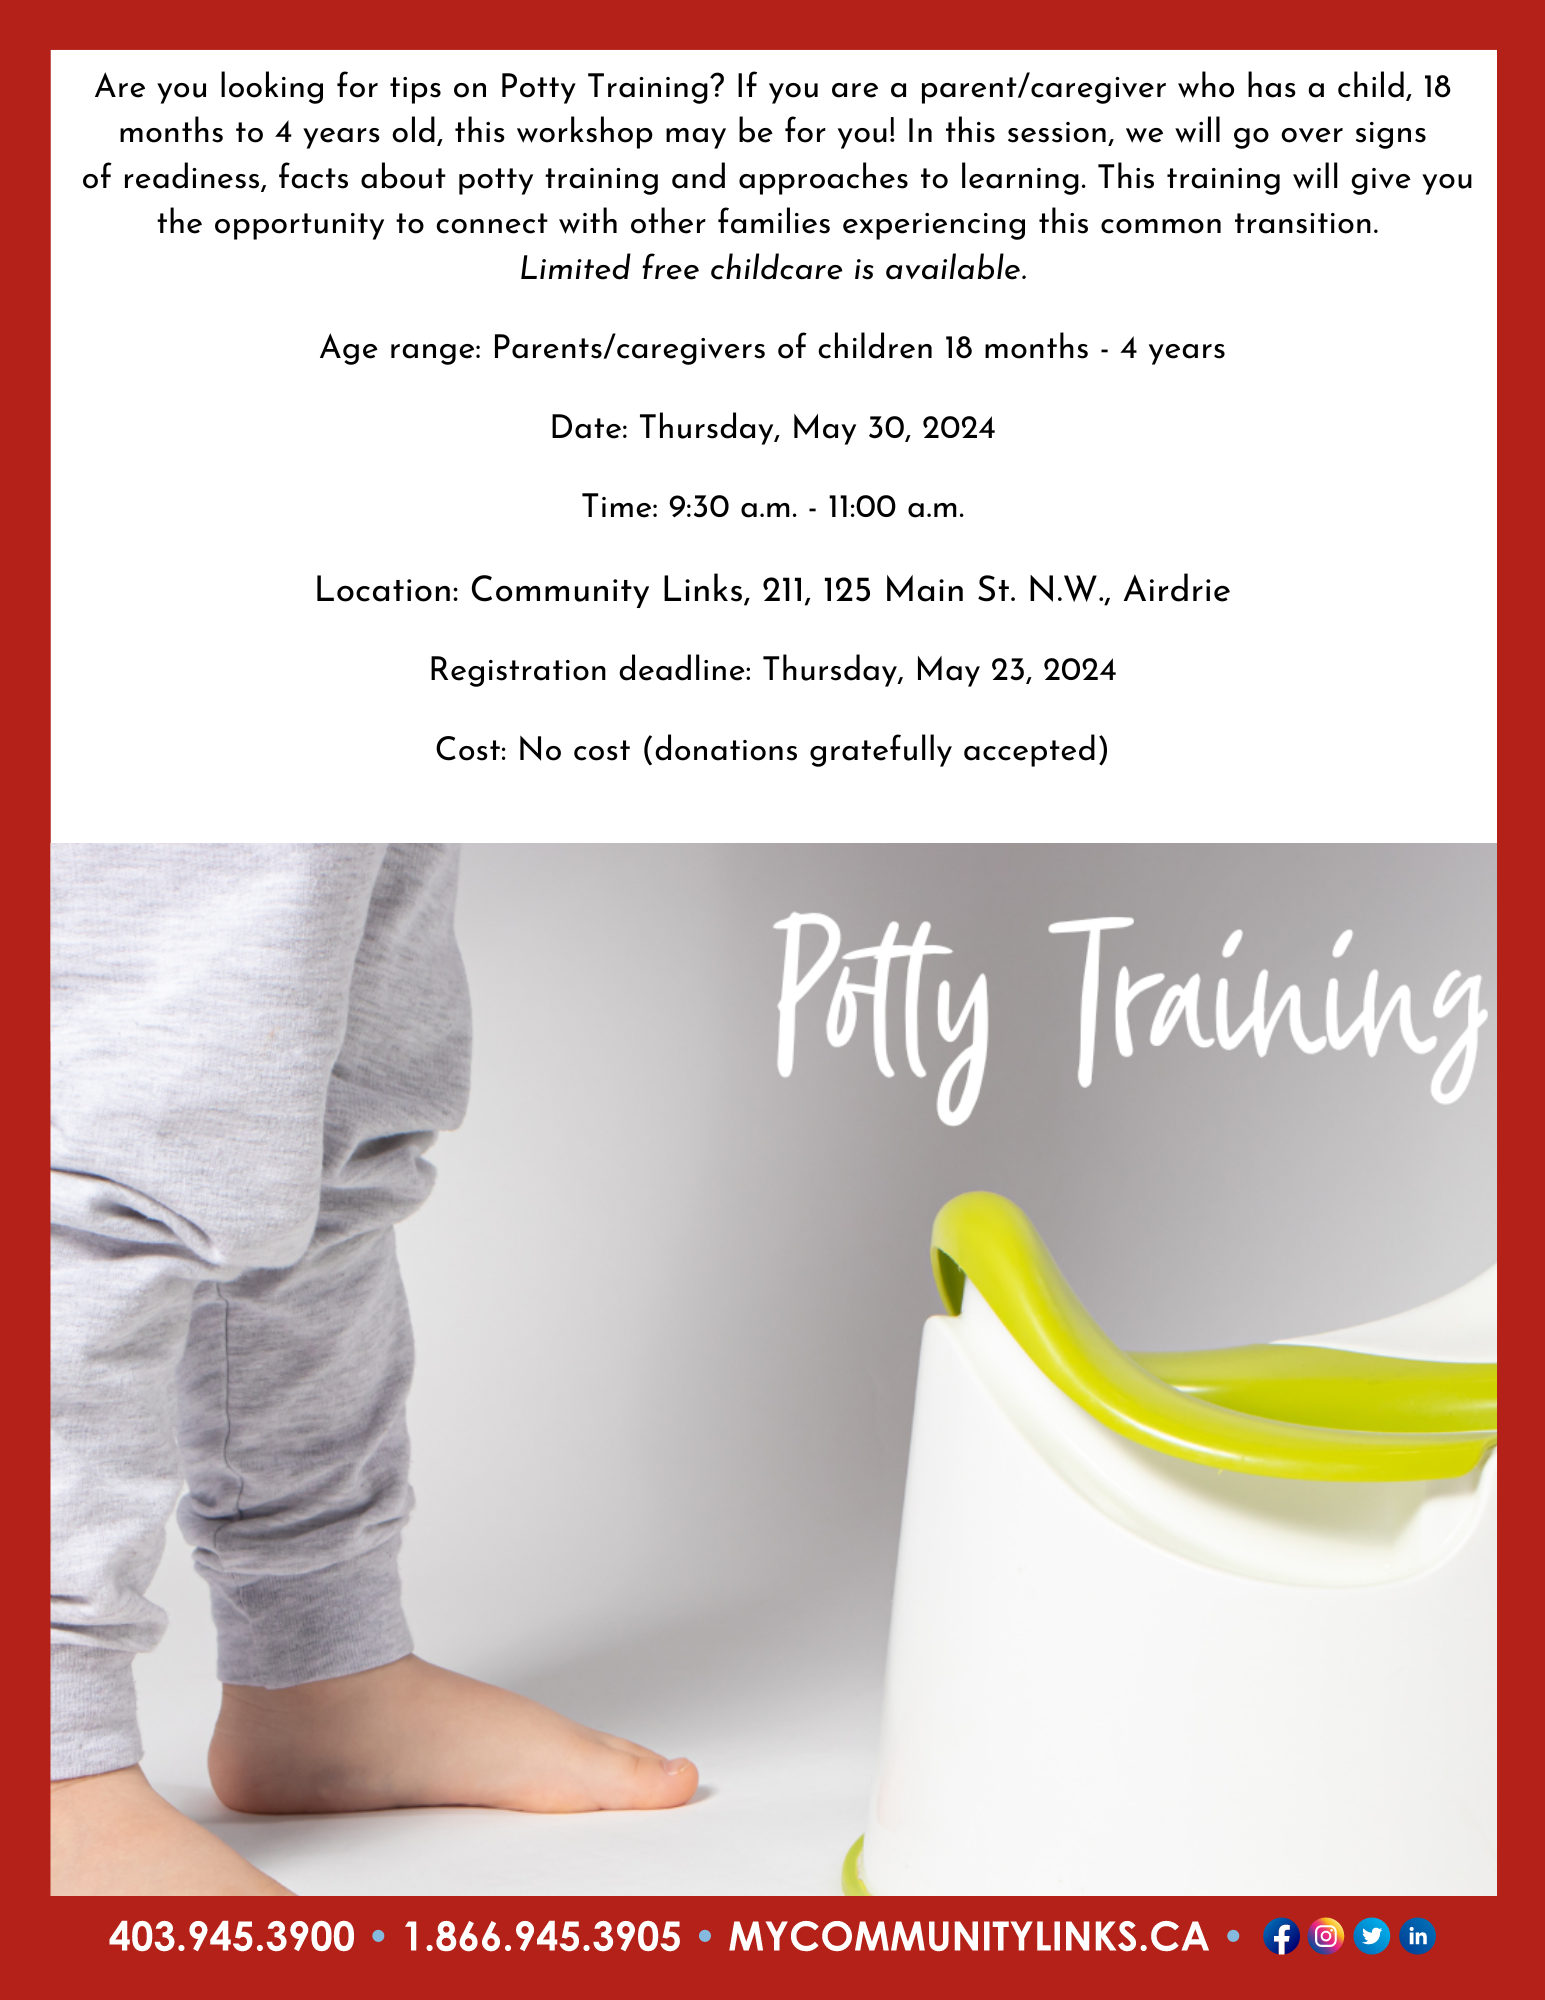 Community Links Airdrie Potty Training program ages 18 months - 4 years, May 30, 2024